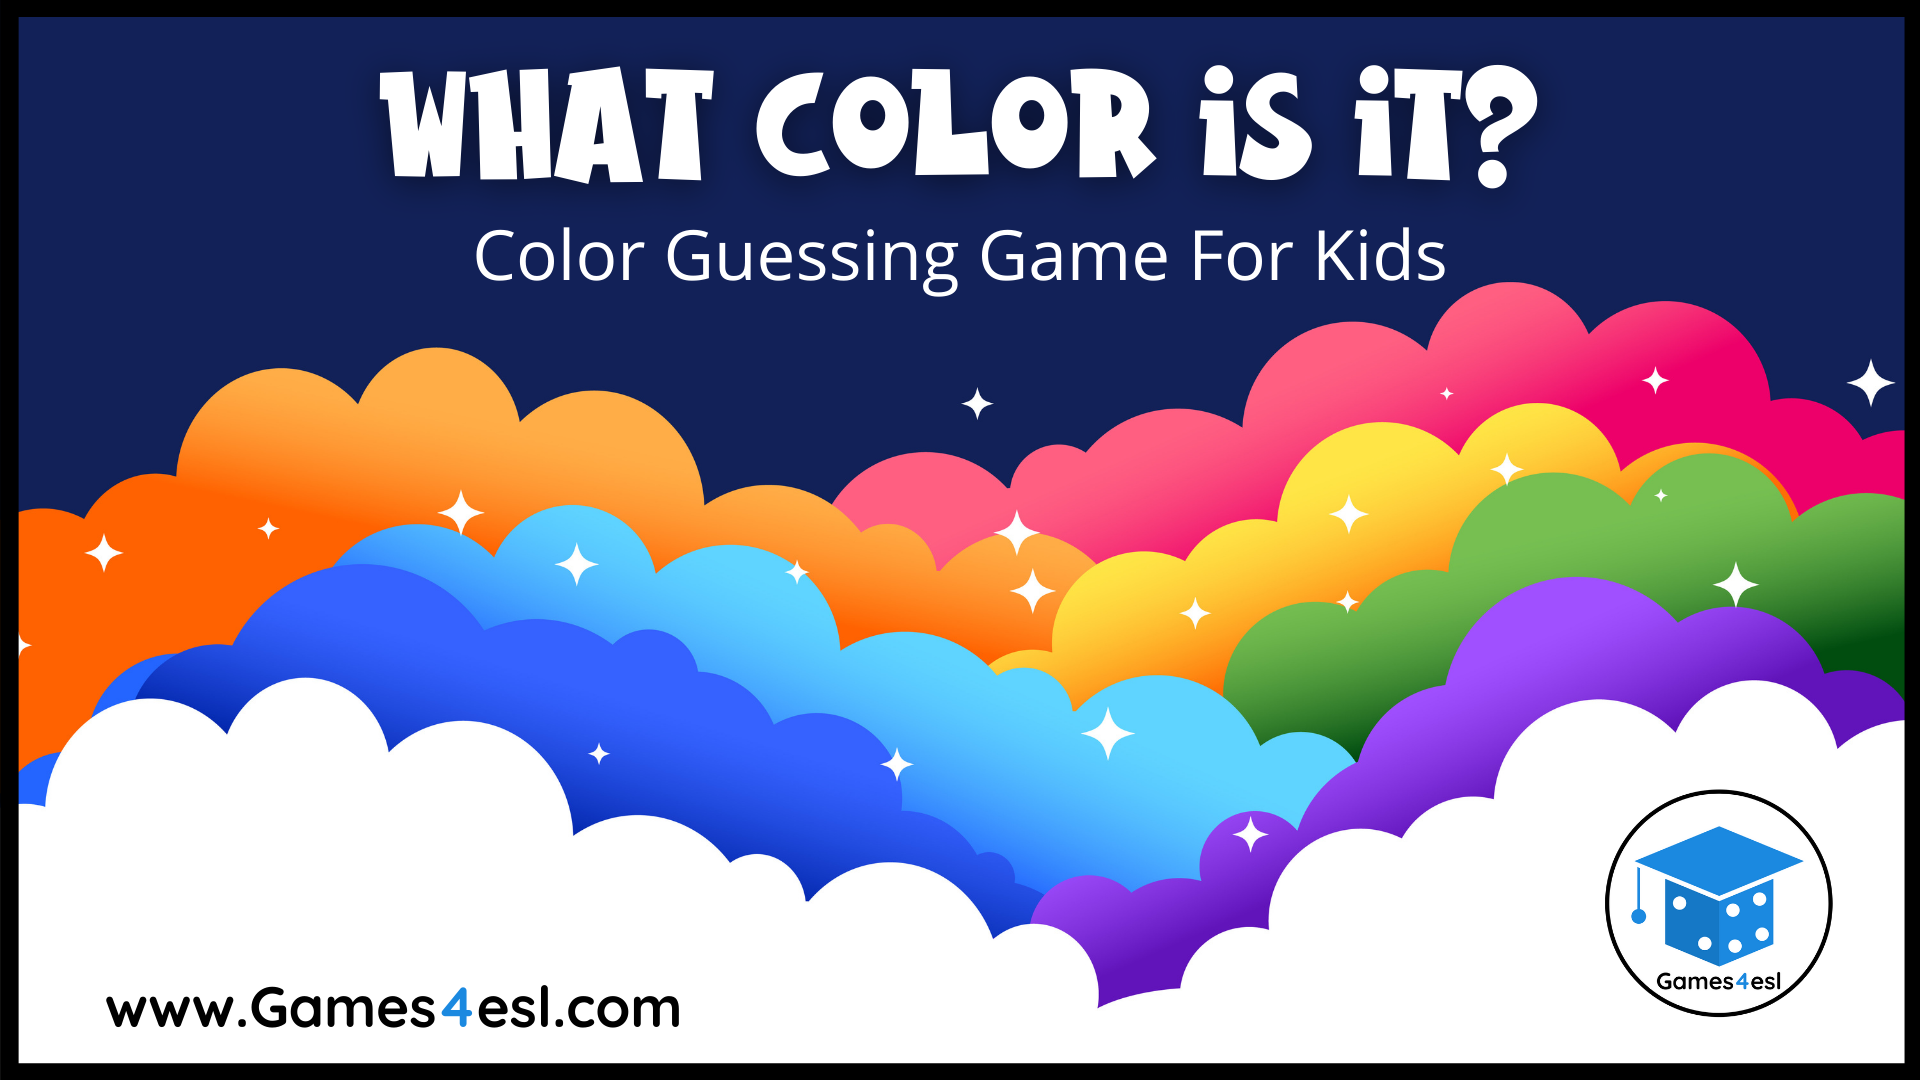 https://games4esl.com/wp-content/uploads/What-Color-Is-It-Colors-Game-for-Kids.png